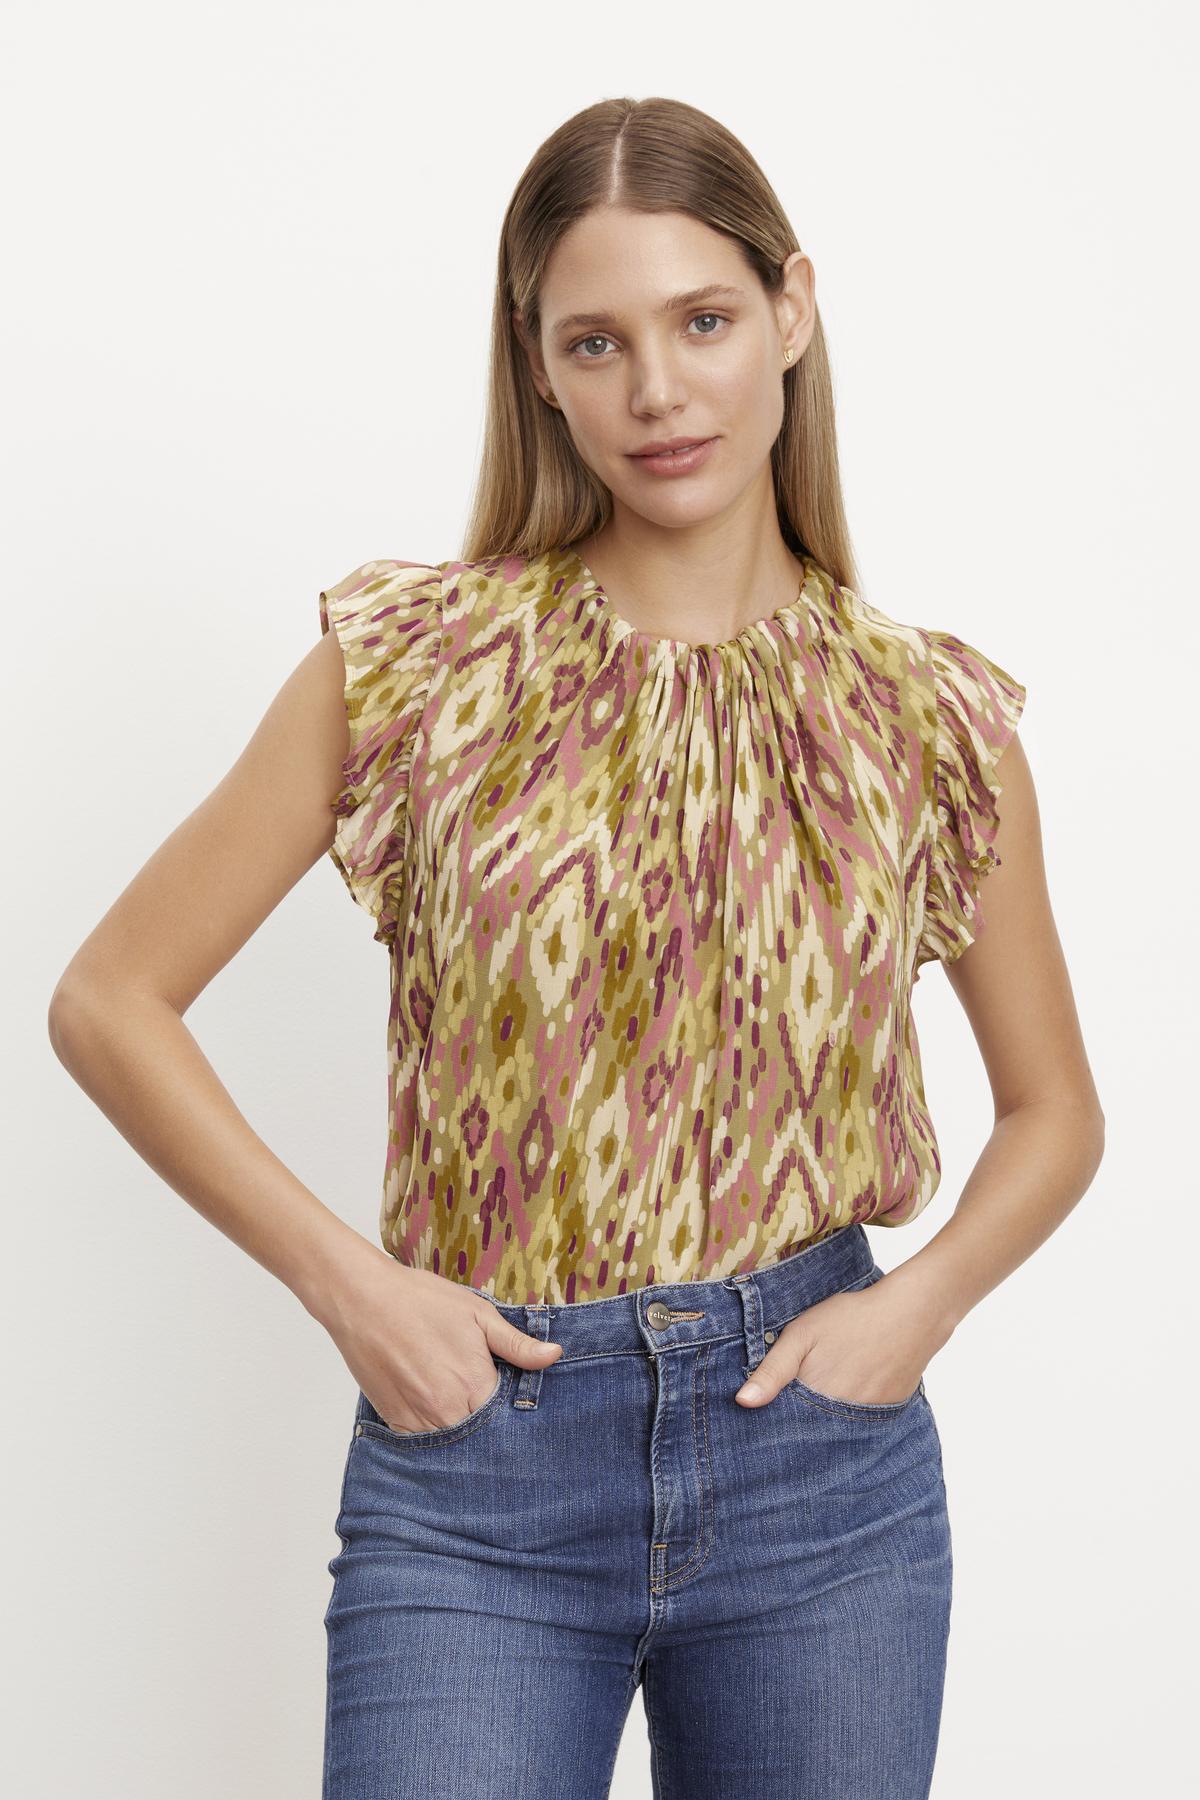 The model is wearing an ADARA PRINTED FLUTTER SLEEVE TOP by Velvet by Graham & Spencer and jeans.-36094266376385